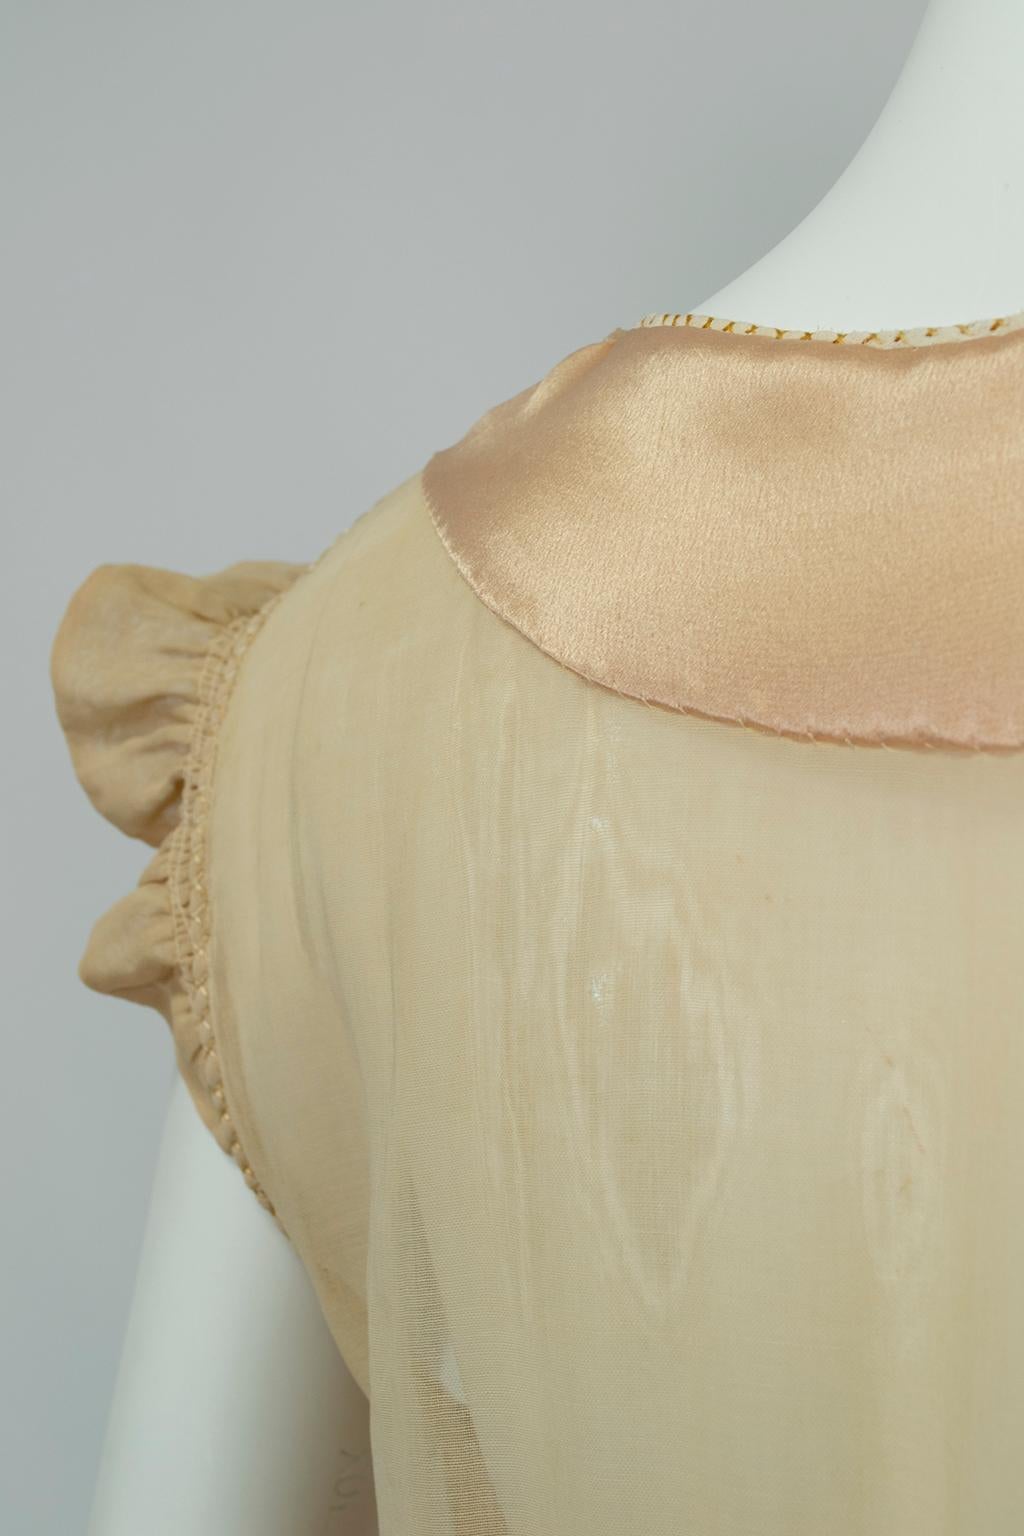 Edwardian Nude Sheer Embroidered Voile and Satin Chemise Dress - M, 1910s 3